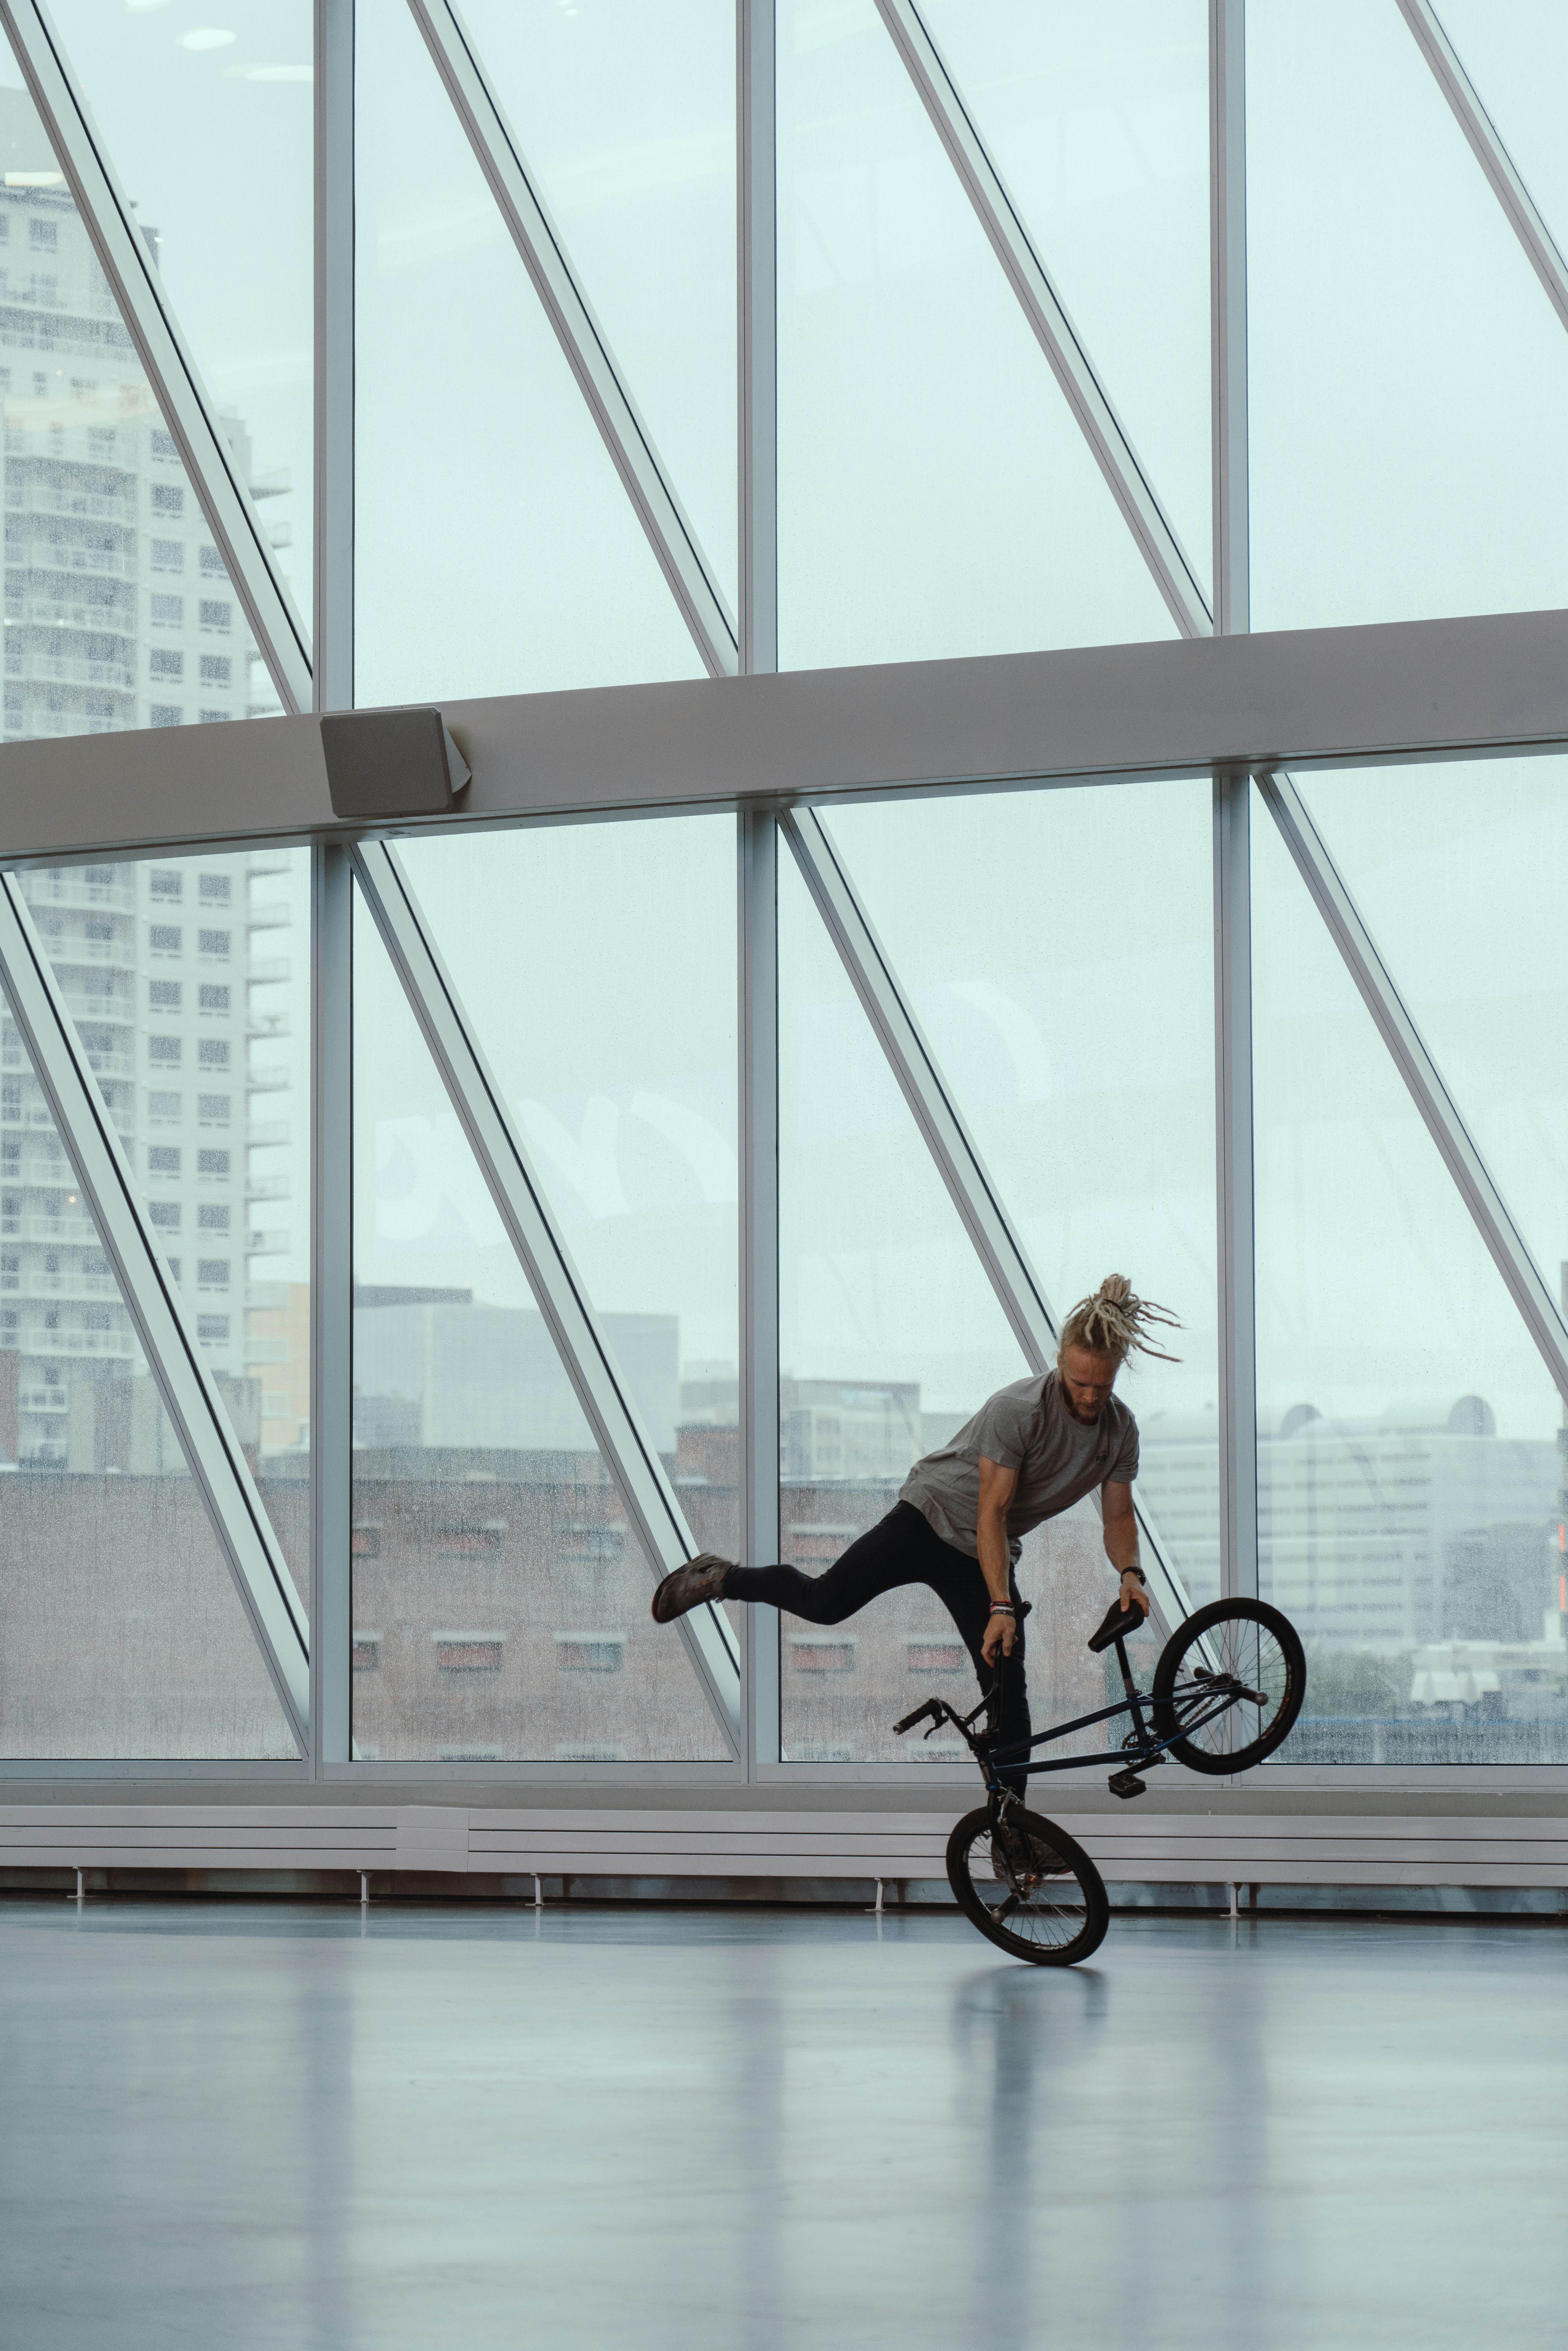 man riding bicycle doing stunts inside glass building during daytime